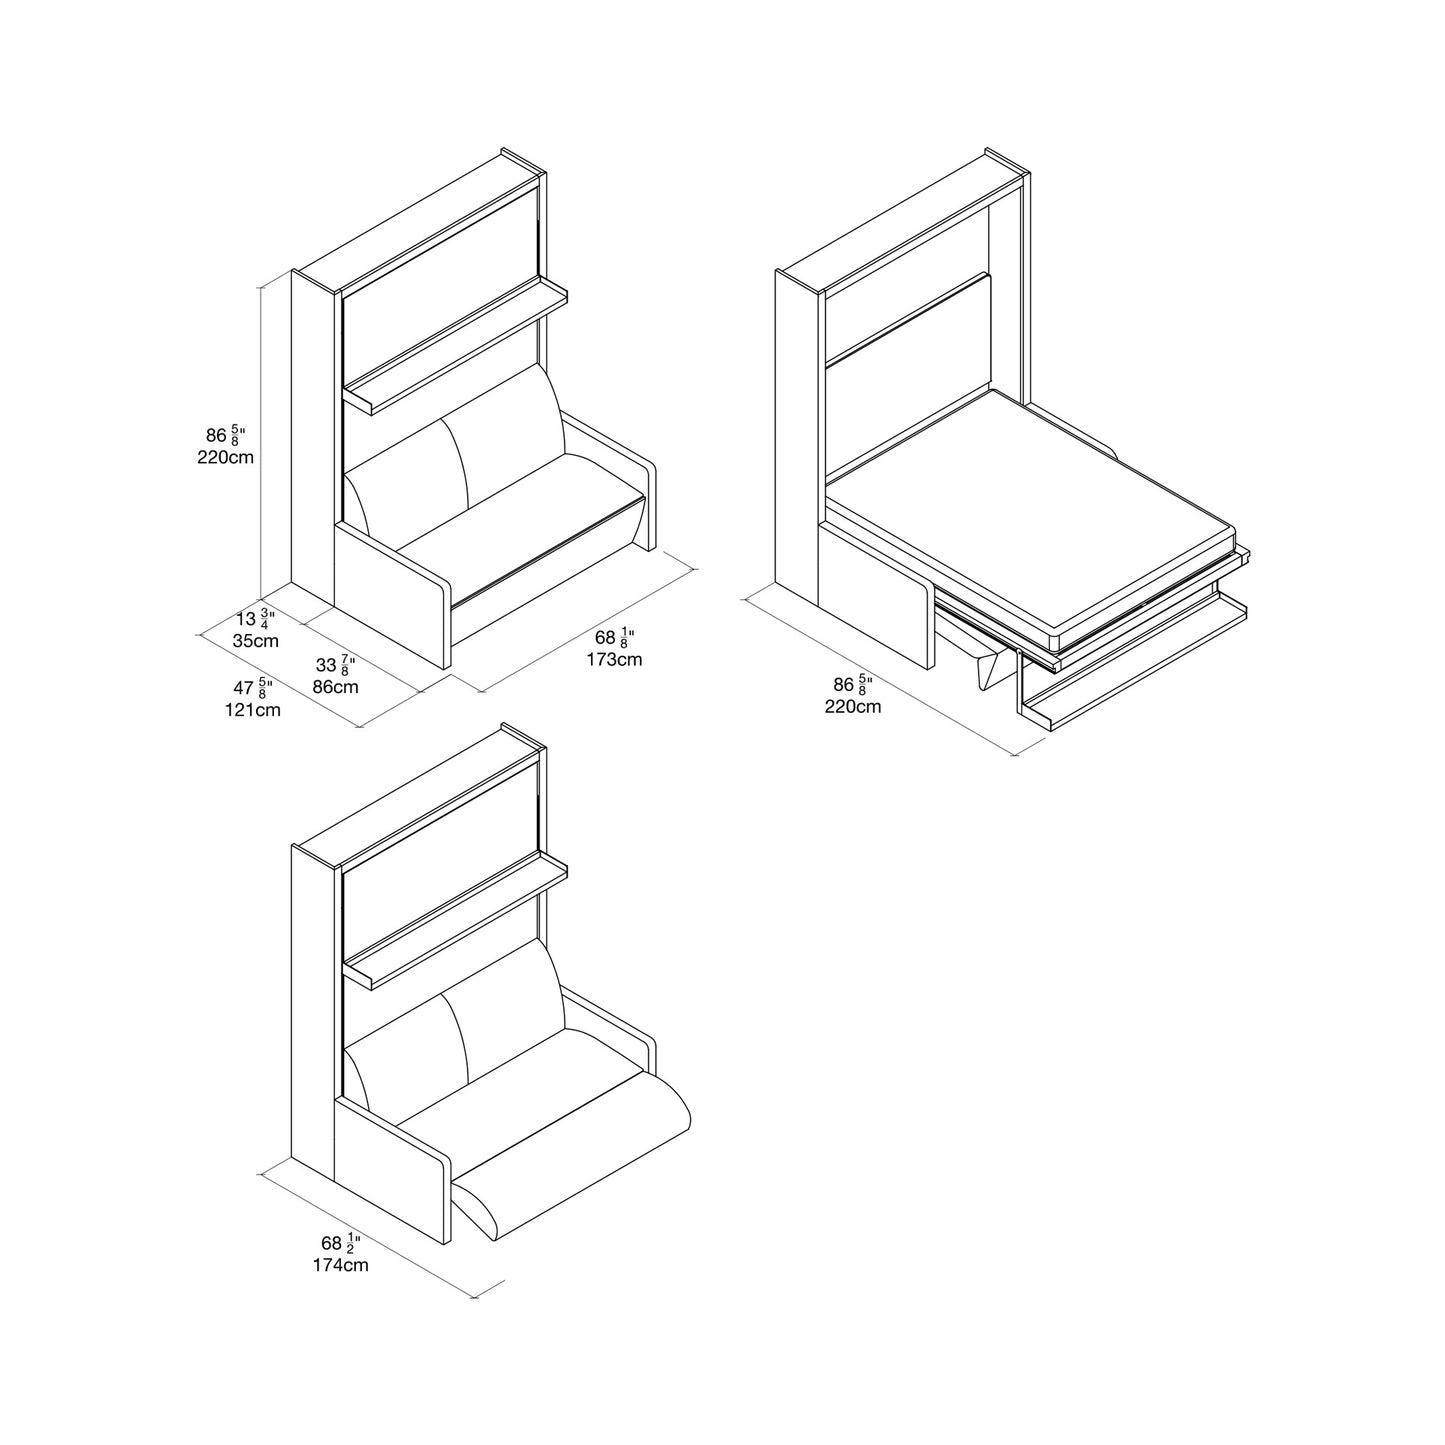 CLEI Ito Sofa wall bed dimensions